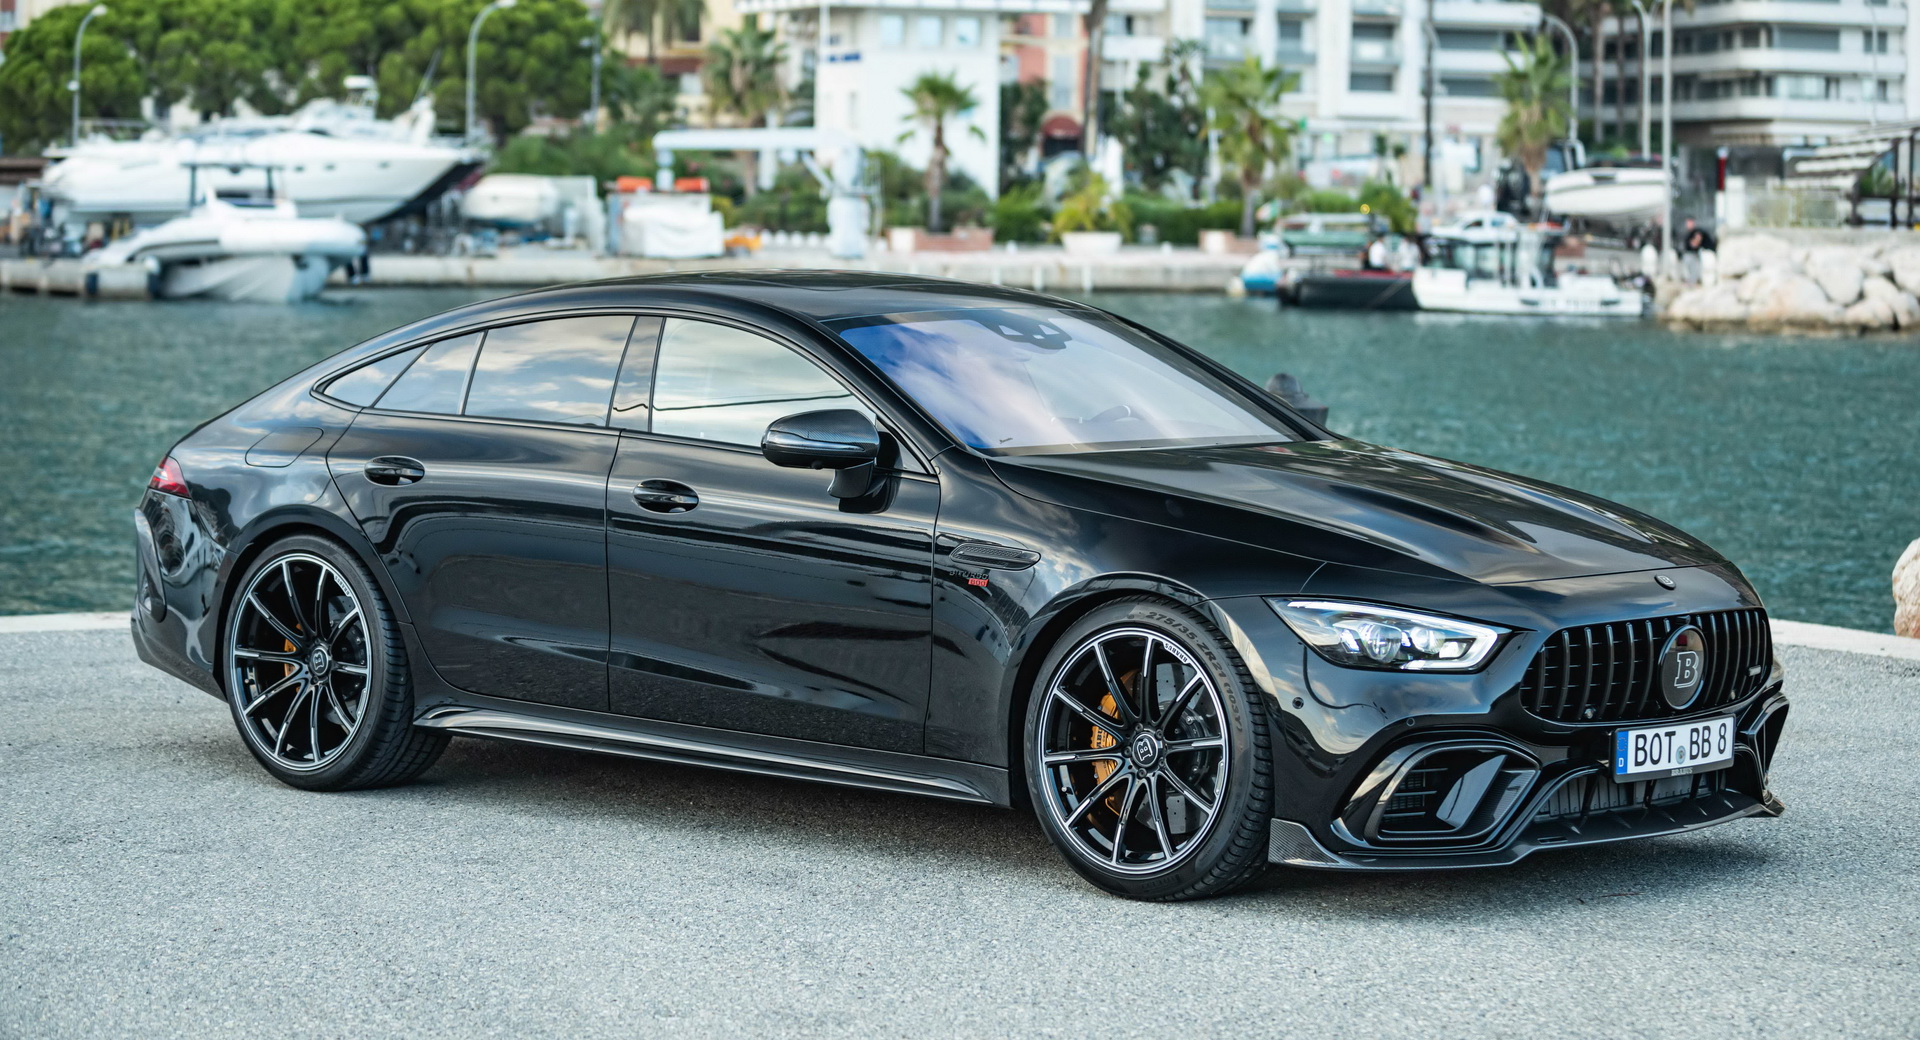 Amg Gt 63 S 0 100 Is The Brabus 800 Mercedes-AMG GT 63 S The Most Badass 4-Door On The  Market? | Carscoops